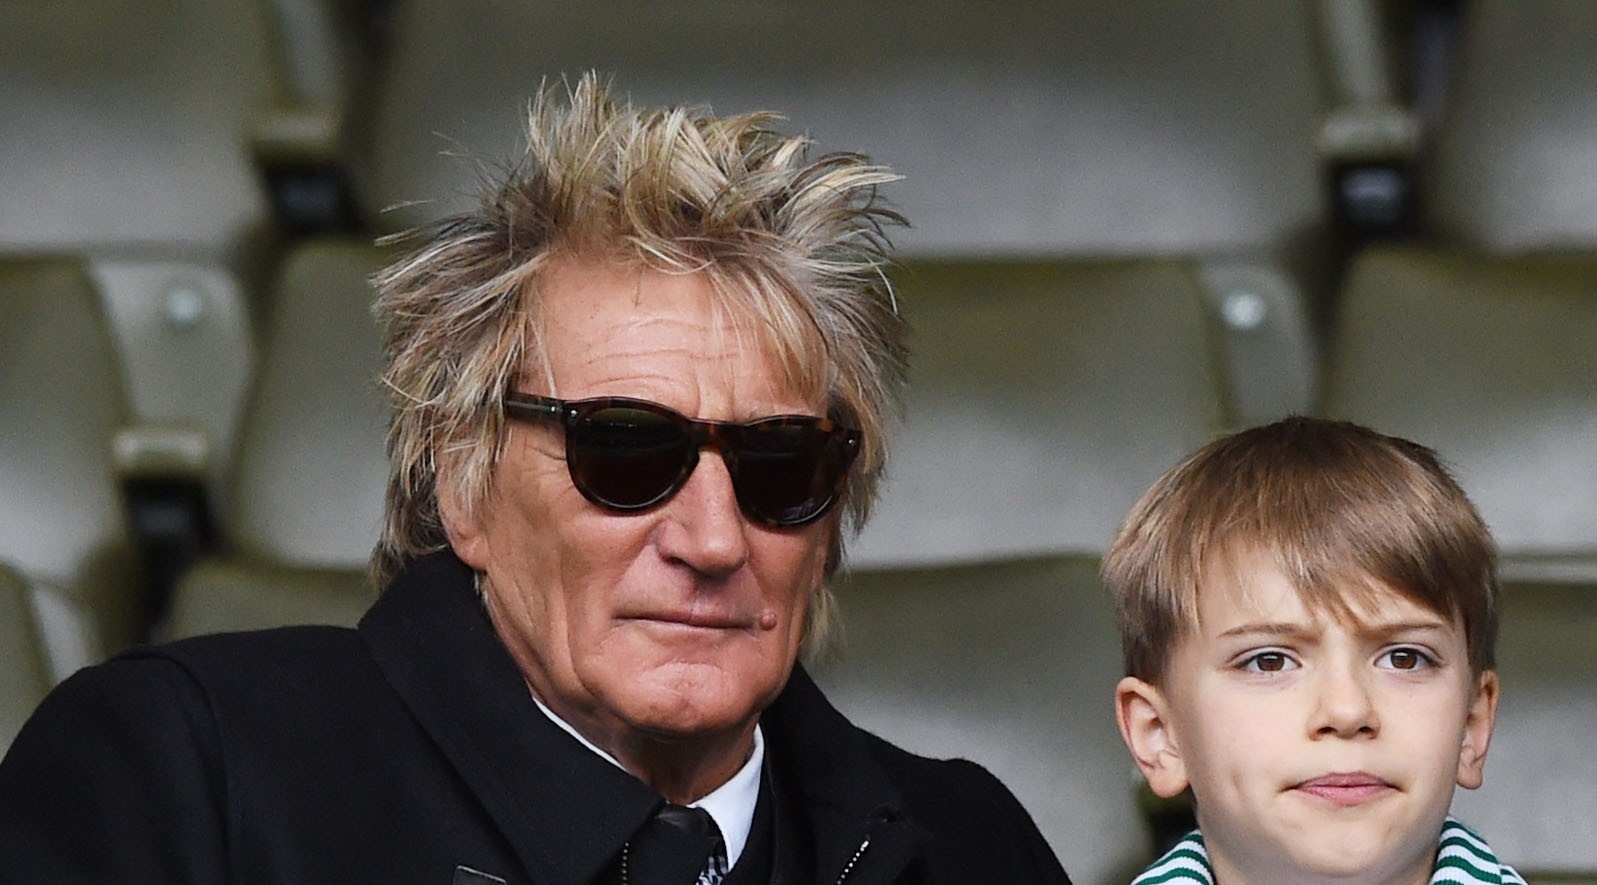 Well, if this doesn't confirm that this afternoon is a big match, we're not sure what does! Rod Stewart has taken his seat at Celtic Park ahead of kick off.